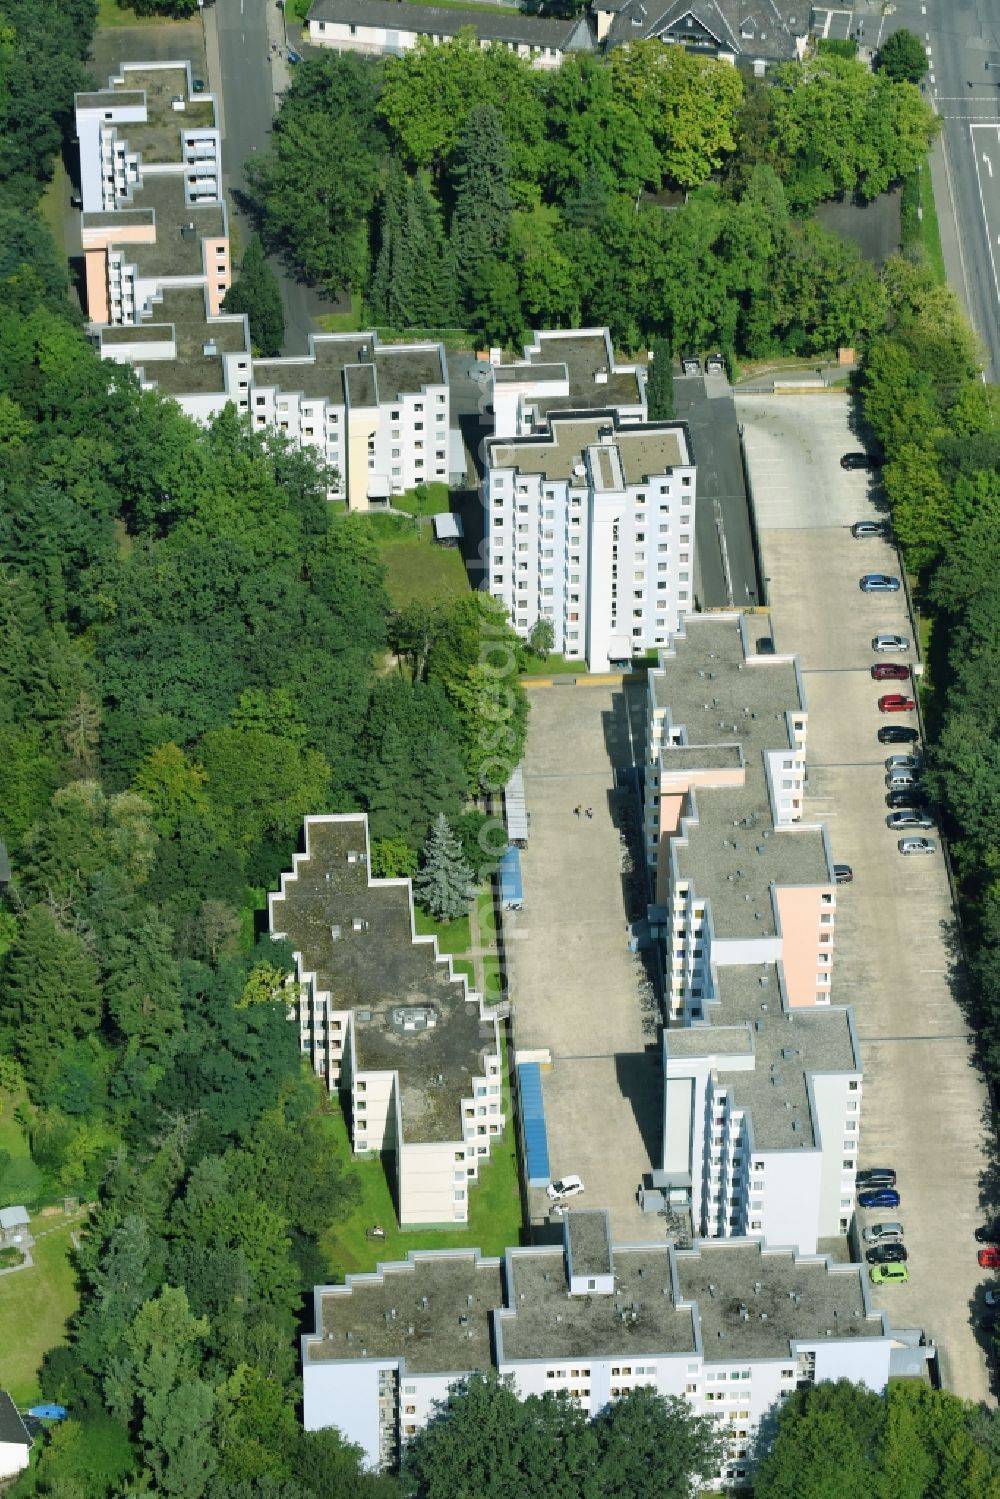 Gießen from the bird's eye view: Skyscrapers in the residential area of industrially manufactured settlement on Unterhof in Giessen in the state Hesse, Germany